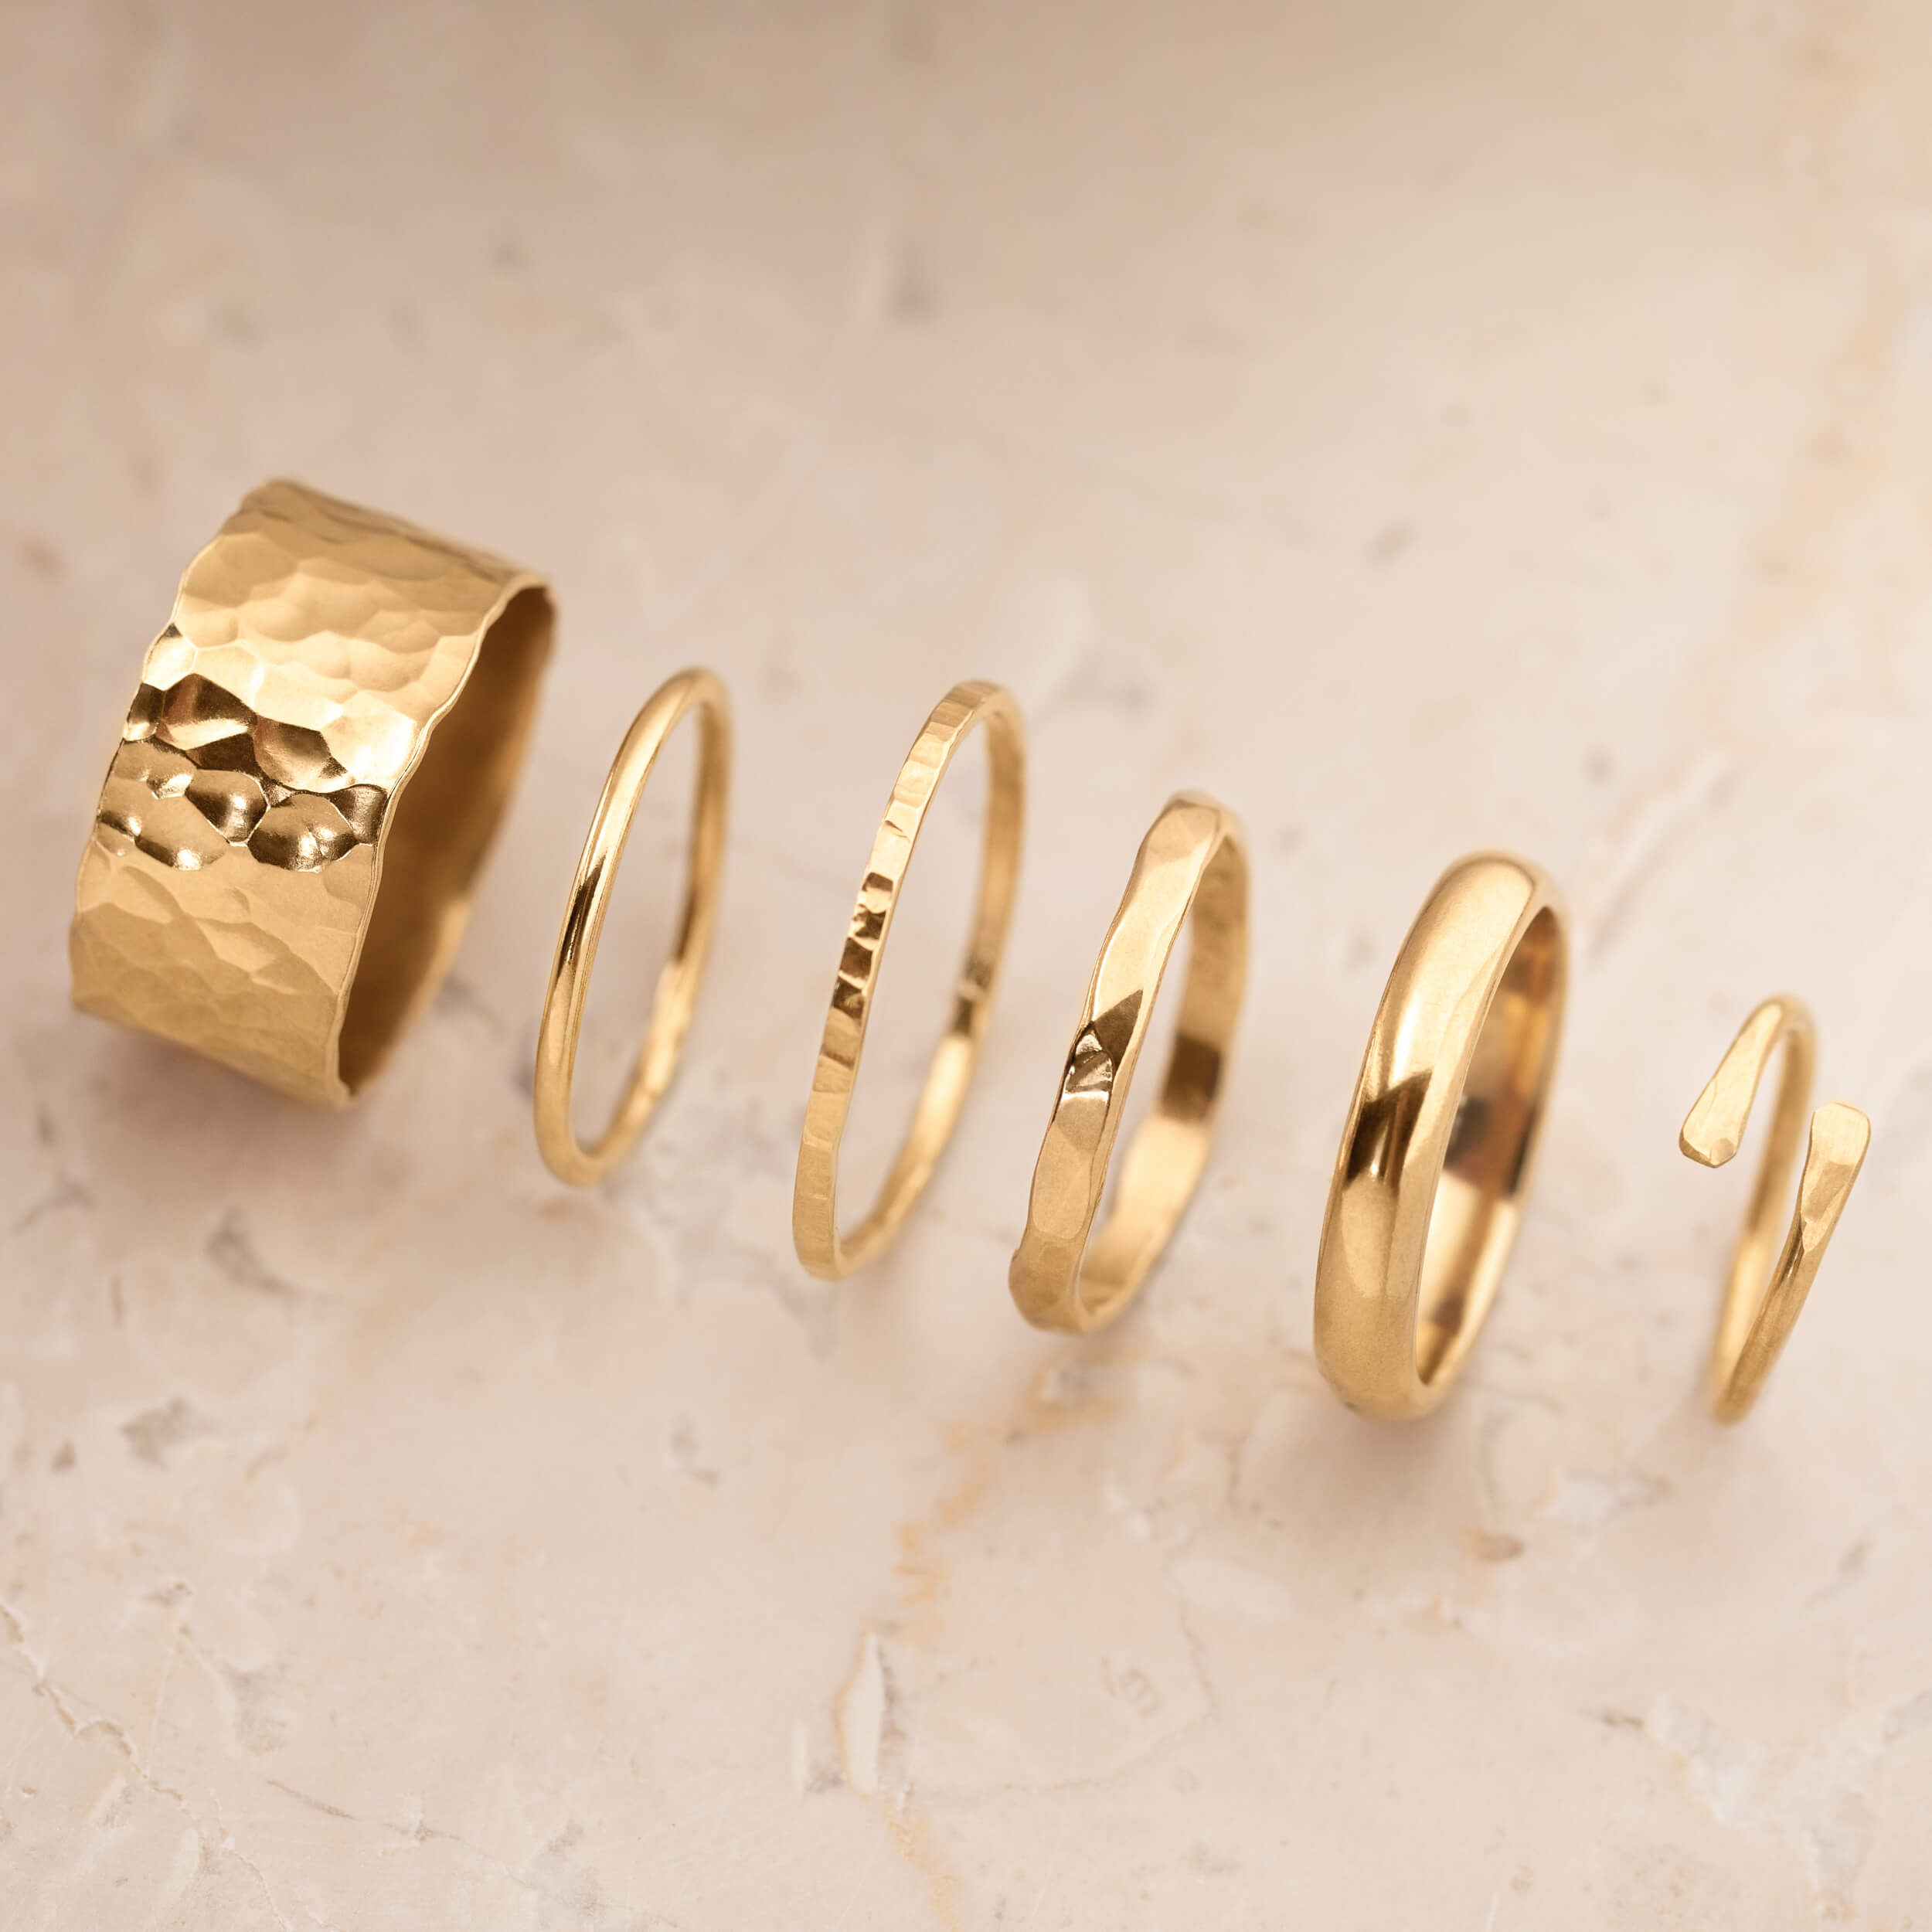 gold vermeil ring, gold skinny ring, gold chunky ring, textured ring, ejd, eleanor jewellery design